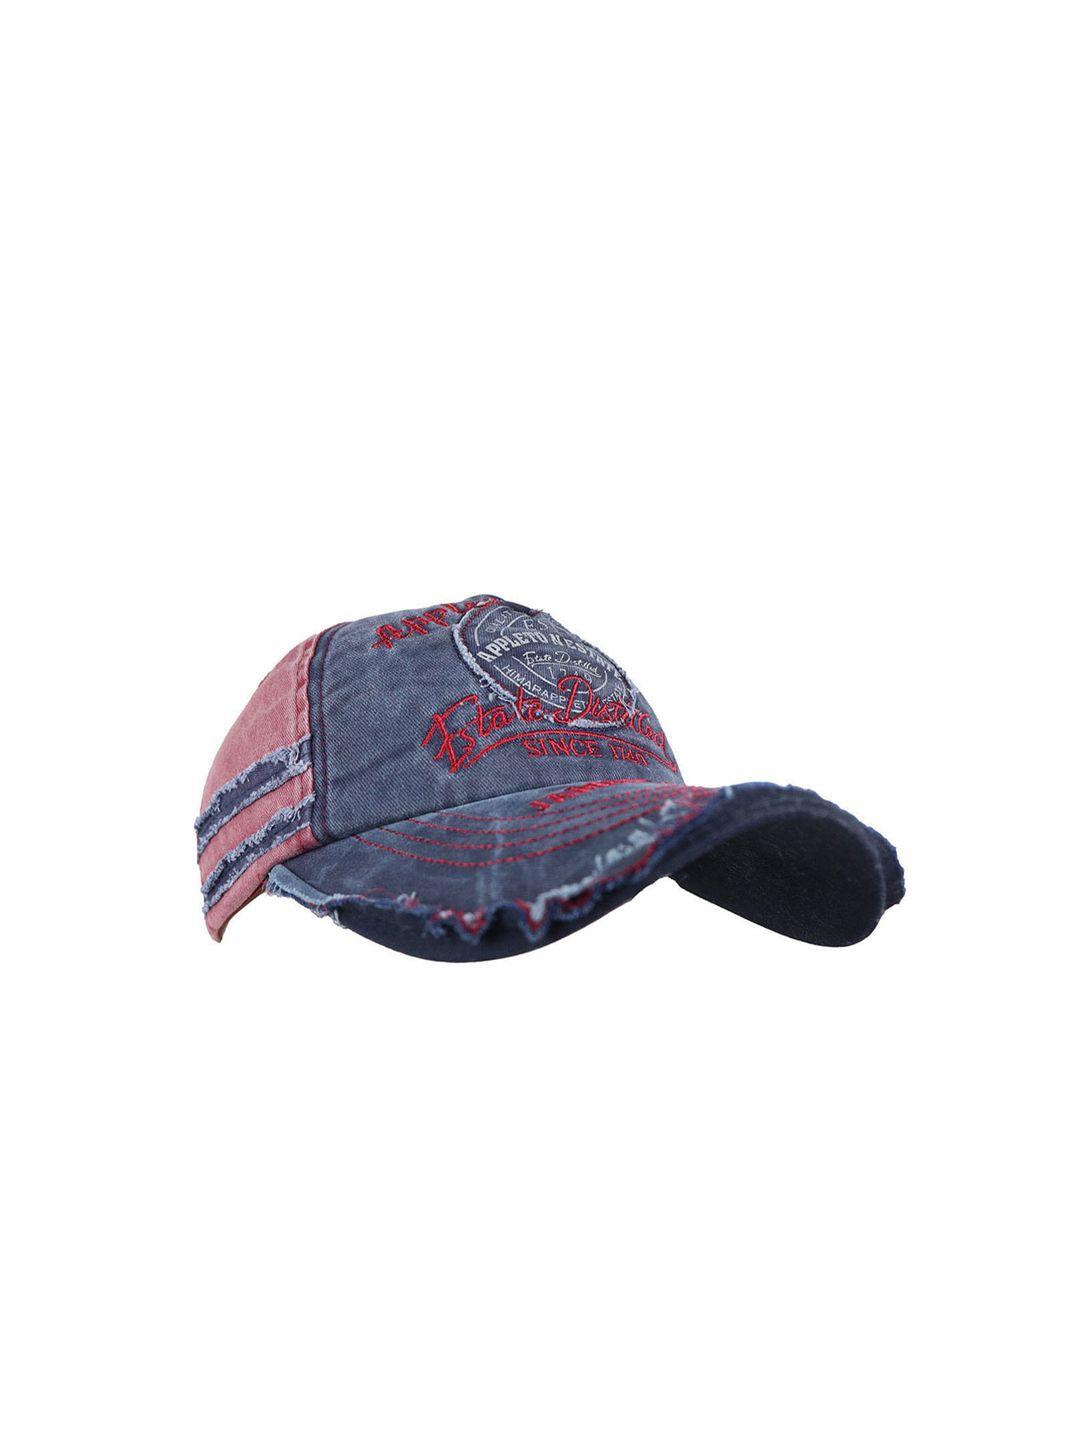 isweven unisex blue & pink embroidered adjustable snapback cap